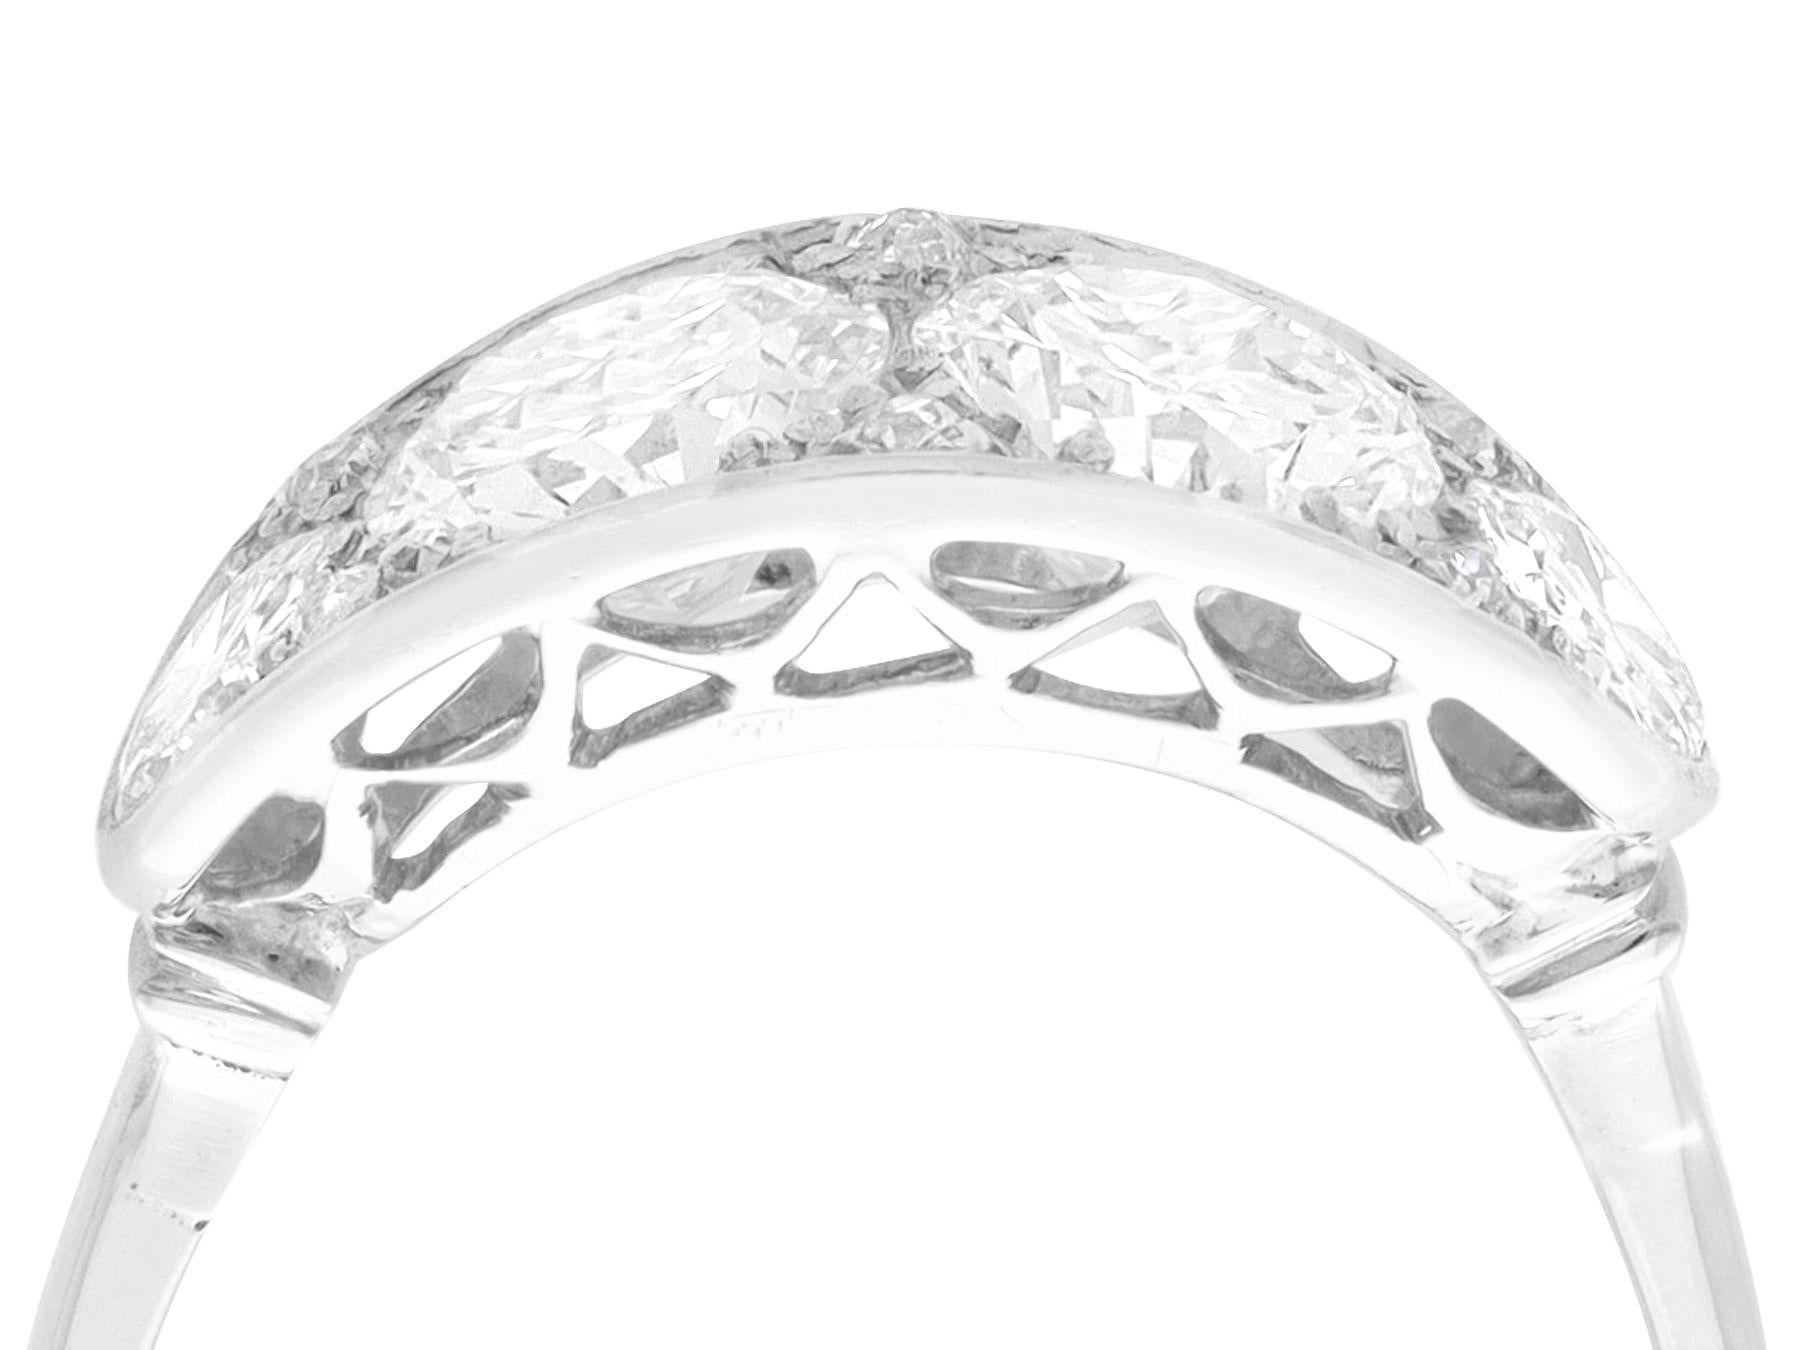 A stunning, fine, and impressive 2.72 carat diamond, 18 karat white gold and platinum set cocktail ring; part of our diverse diamond jewelry collections

This stunning, fine and impressive vintage ring has been crafted in 18 karat white gold with a